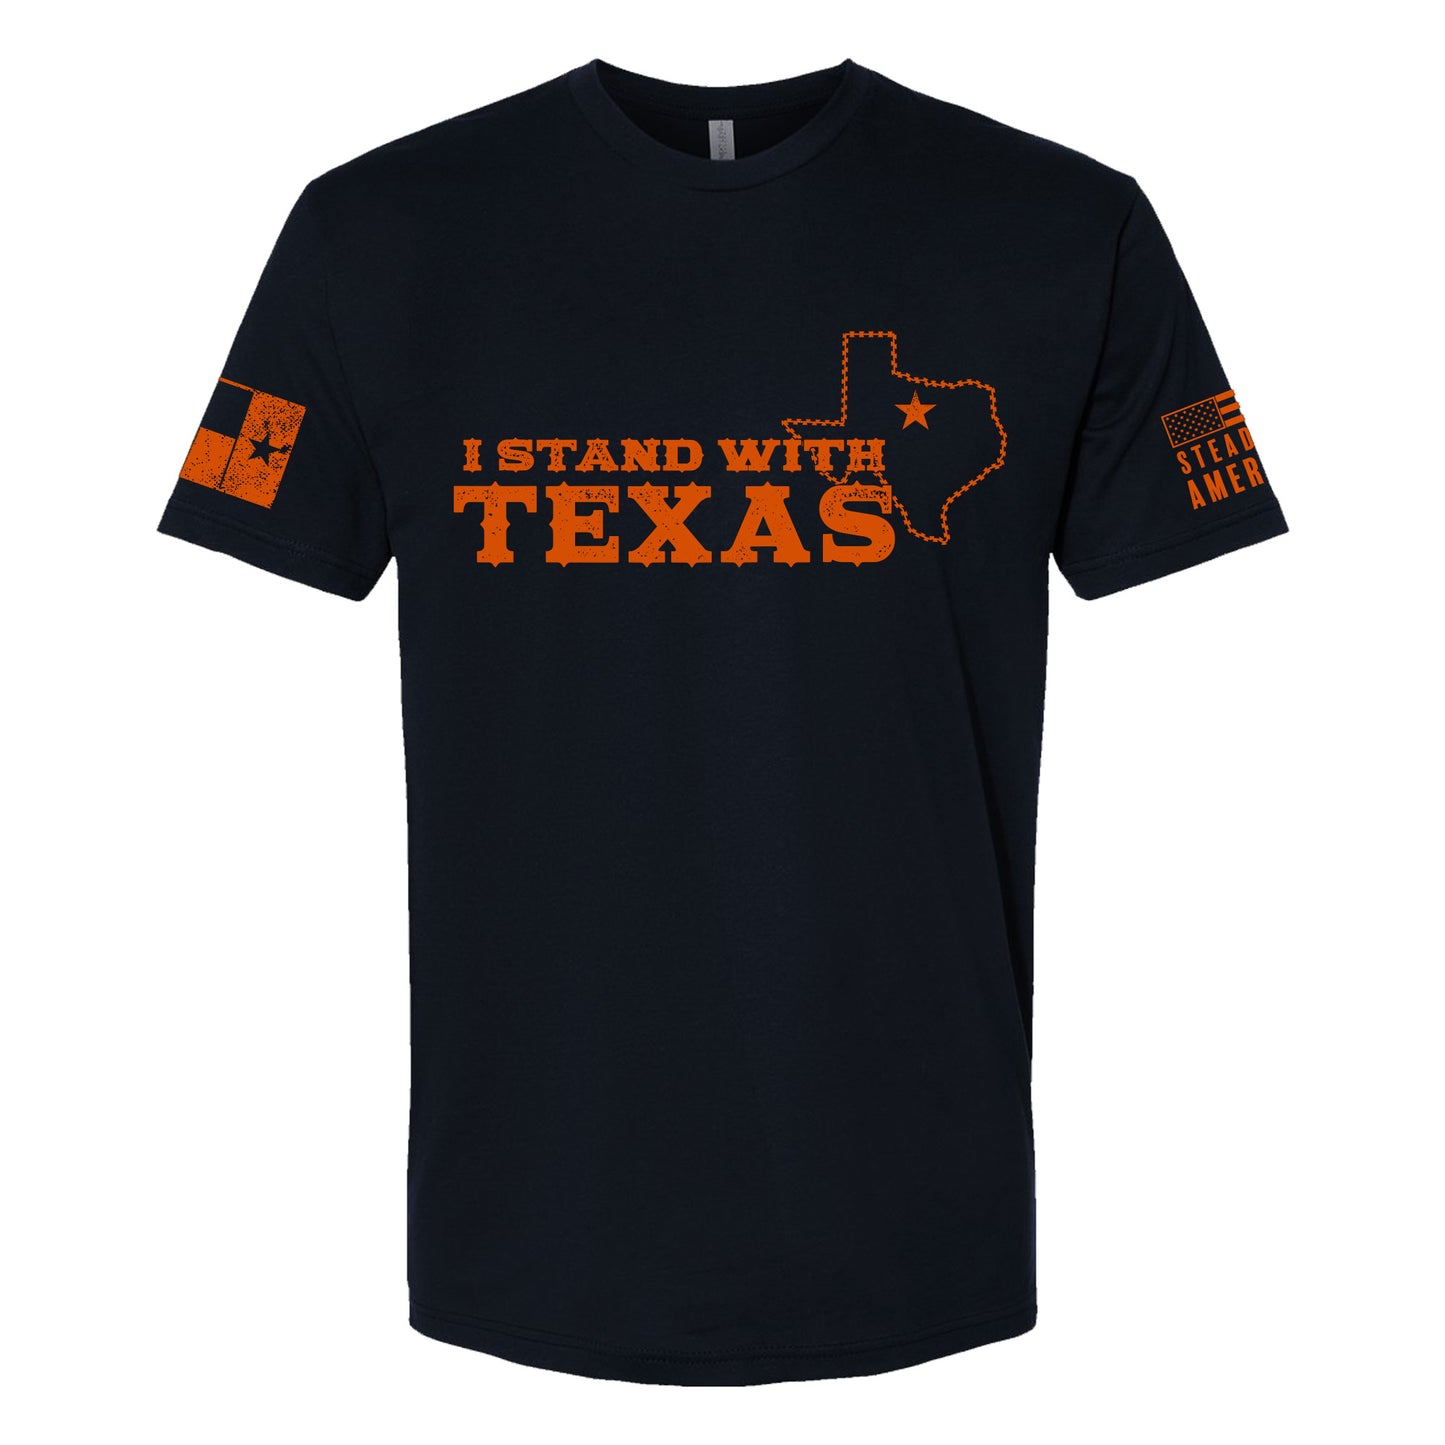 I Stand With Texas, Short Sleeve, Black / F.D.E. / O.D. Green